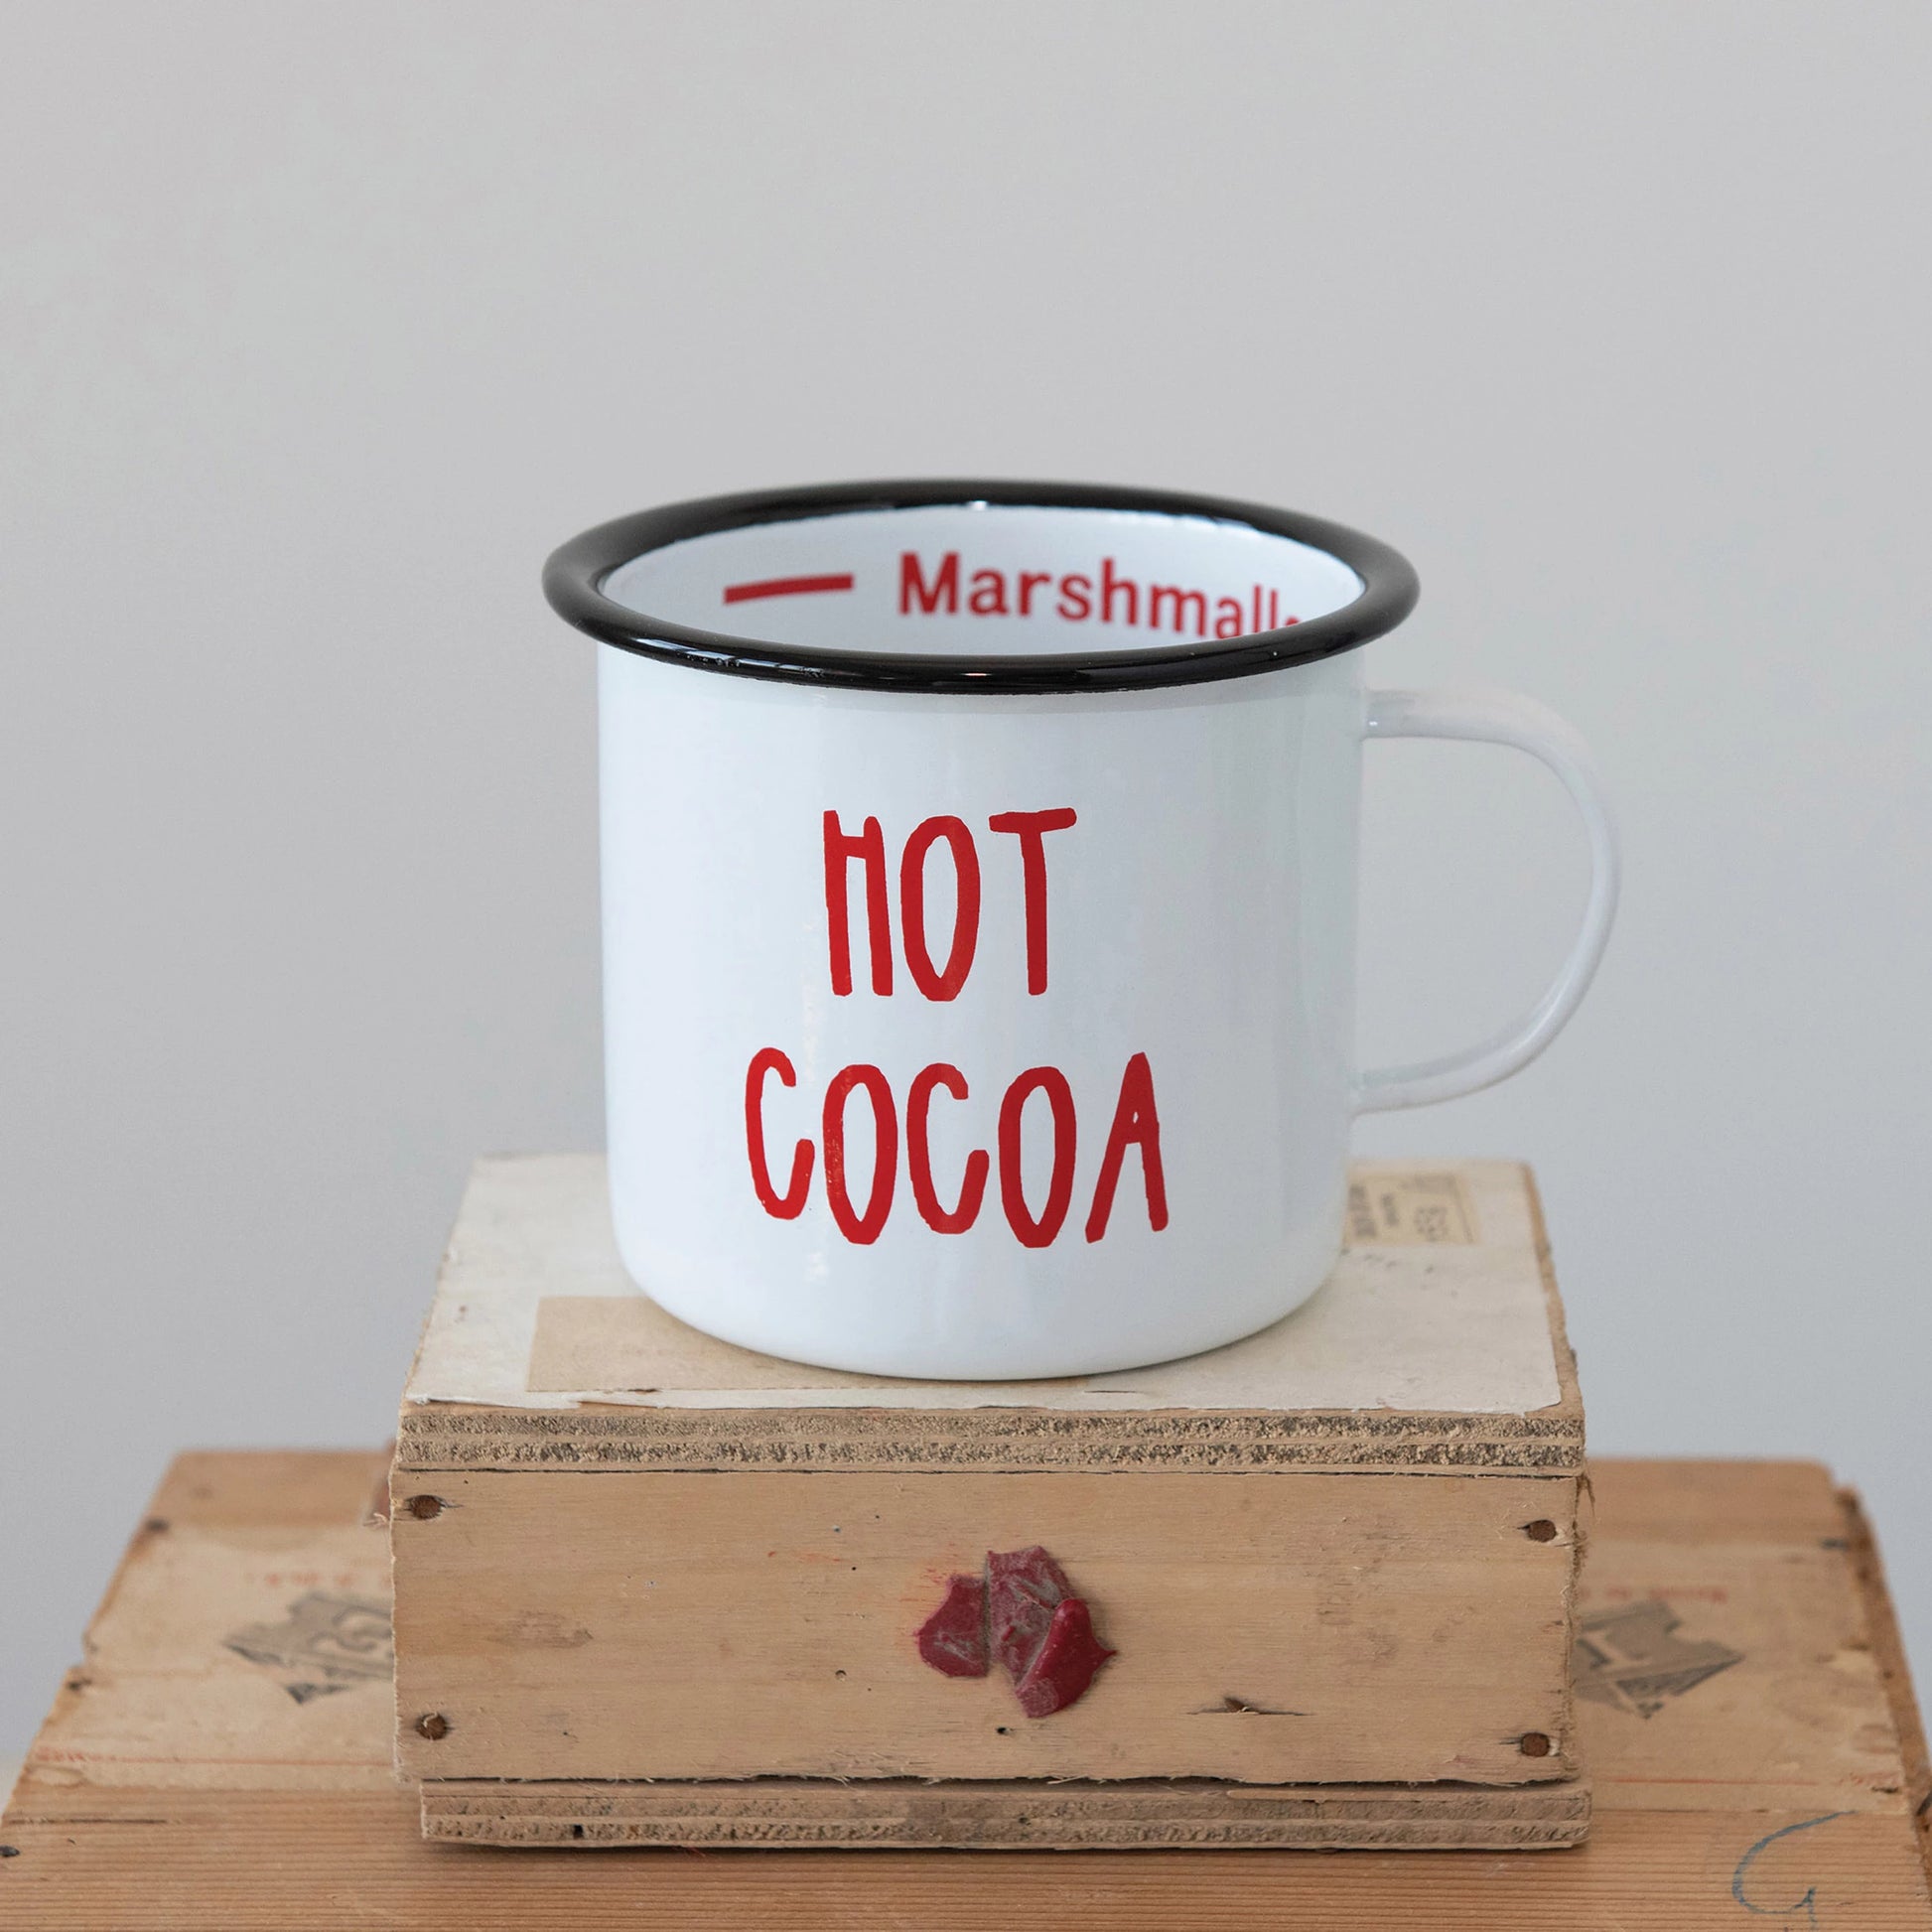 white tin mug with a black rim and hot cocoa written in red.